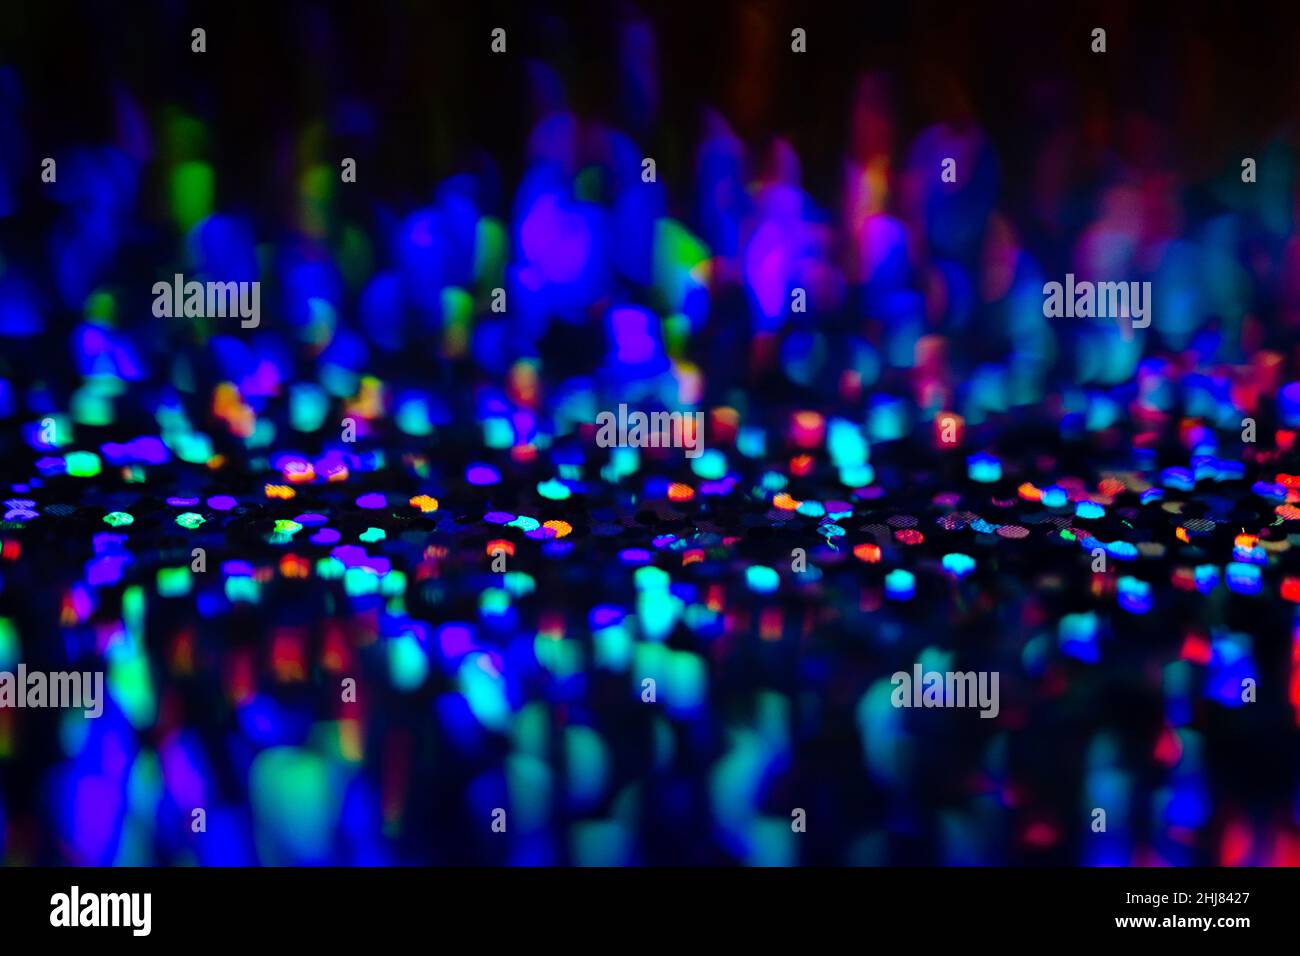 Neon rainbow glittering lights with glow effect abstract background Stock Photo